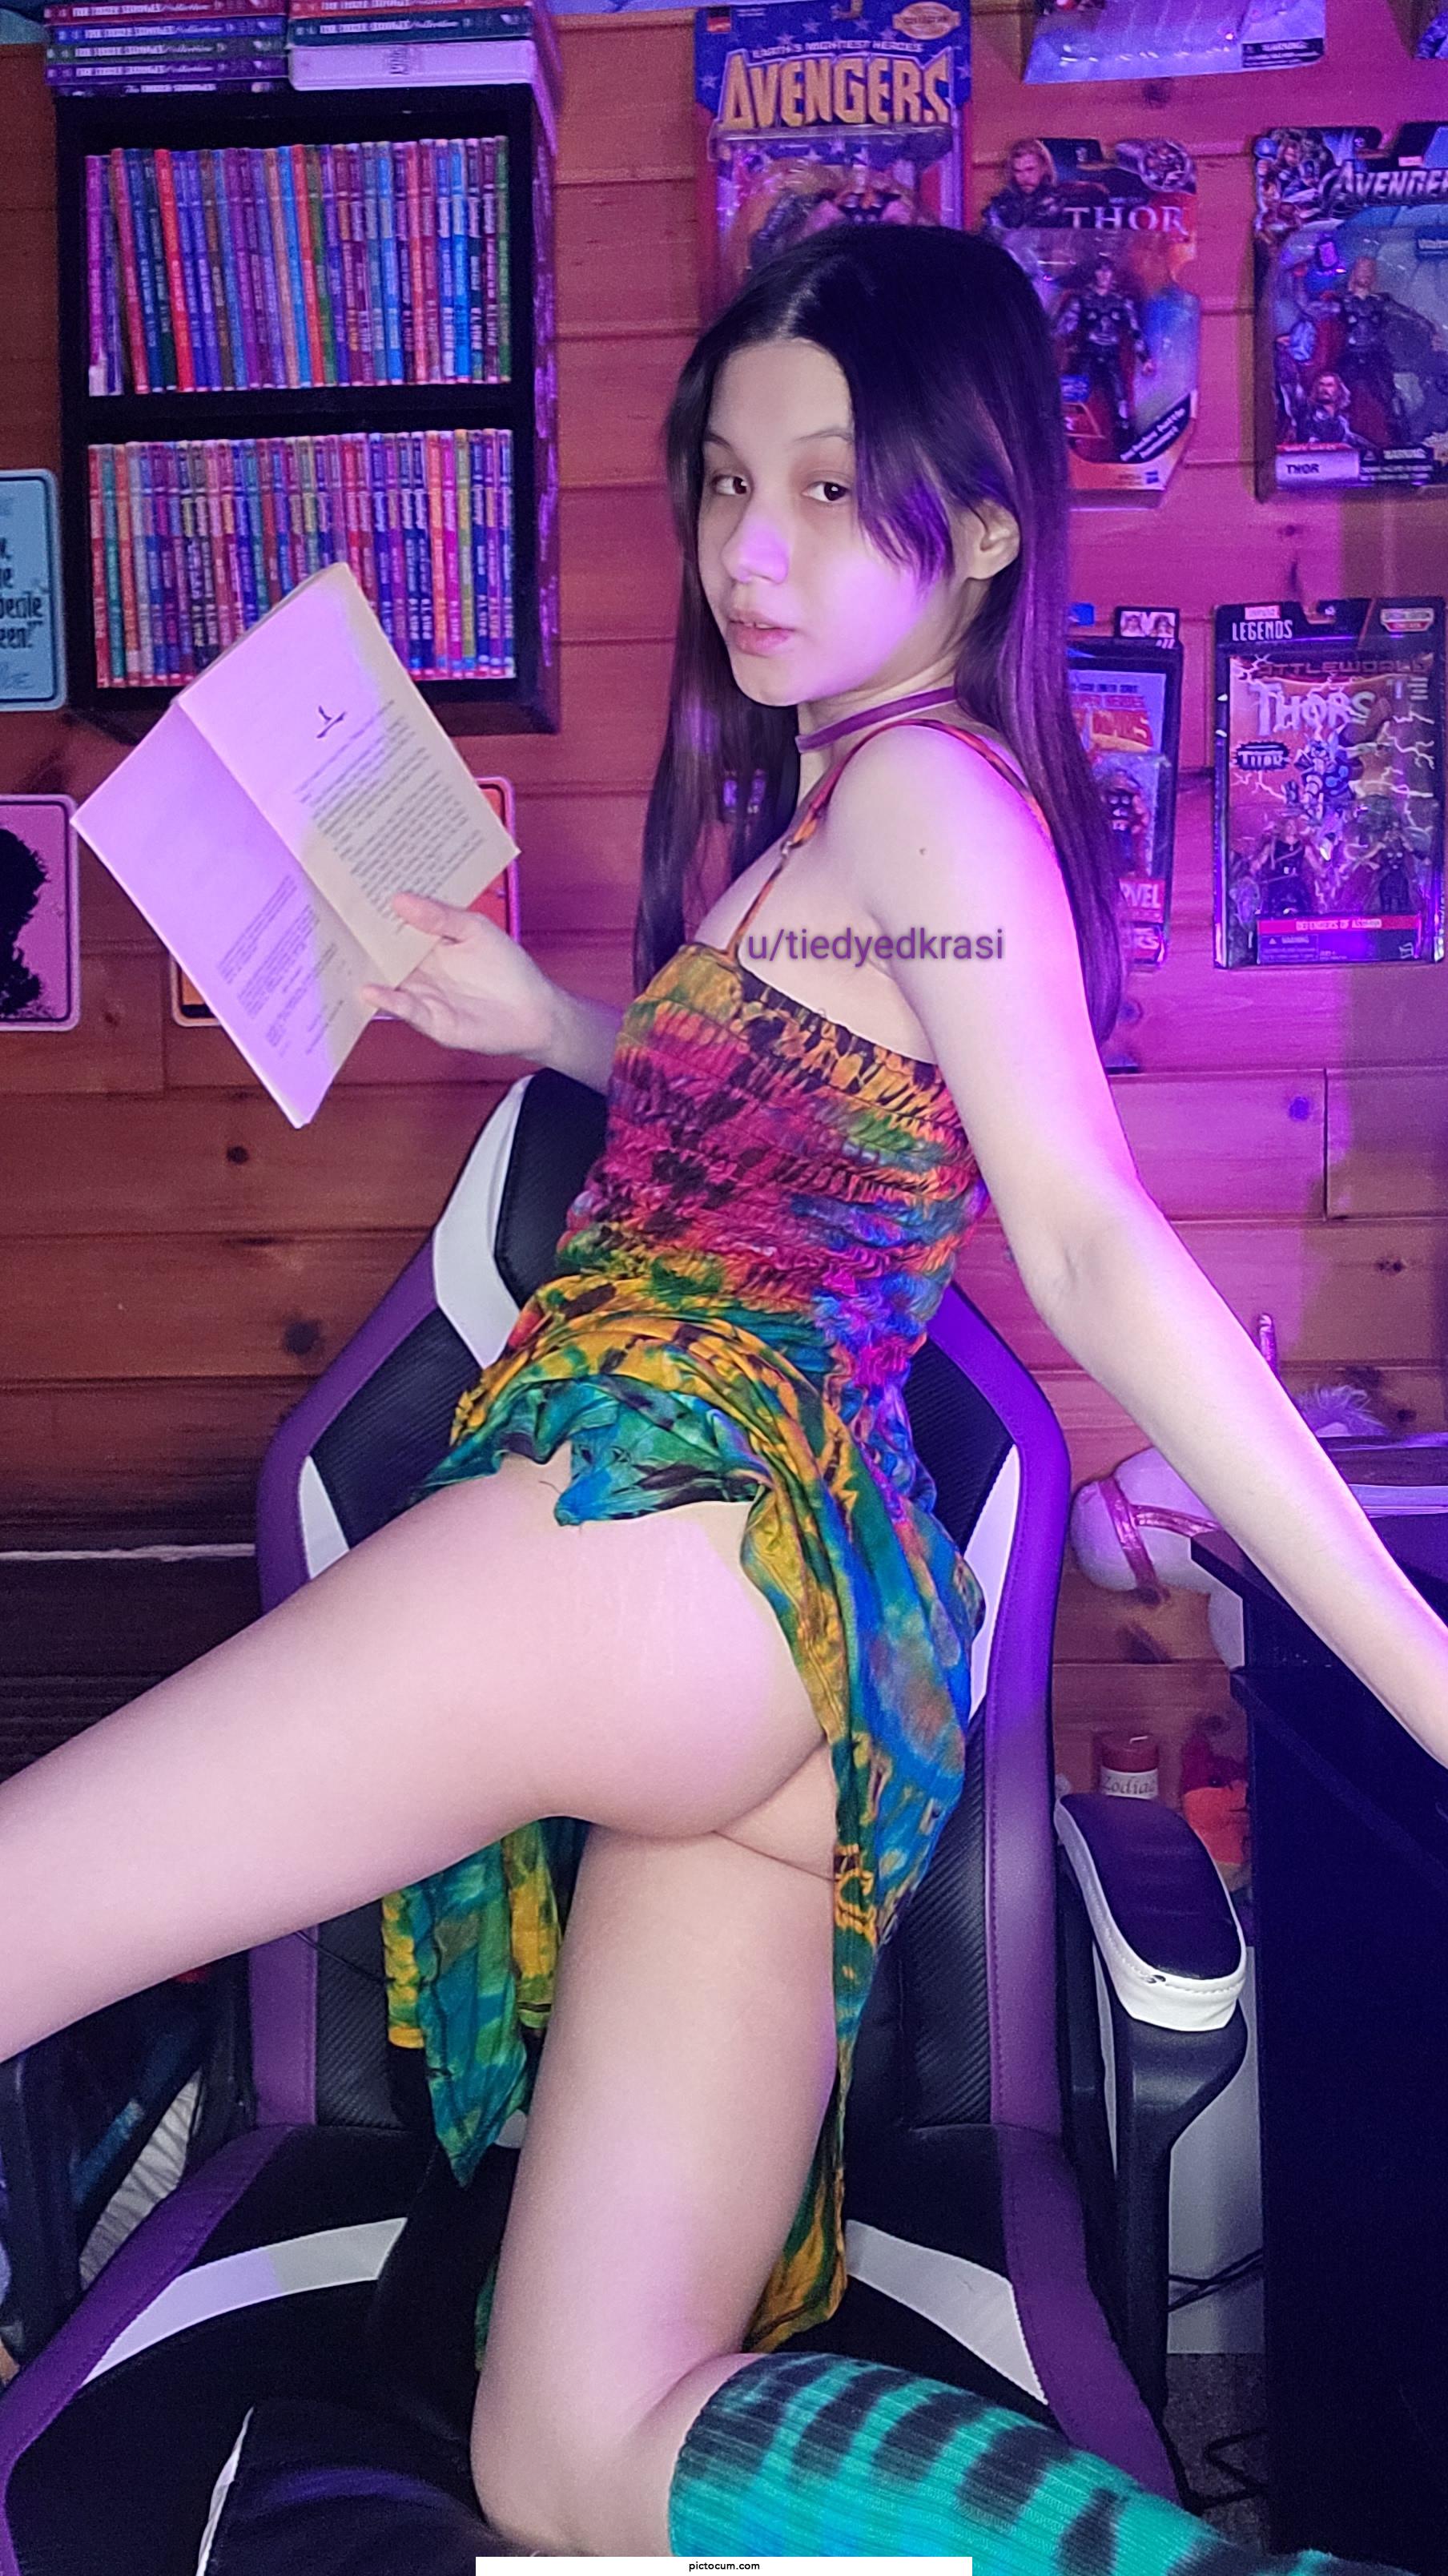 can the geeky Asian gal who's got a cute booty, turn you on